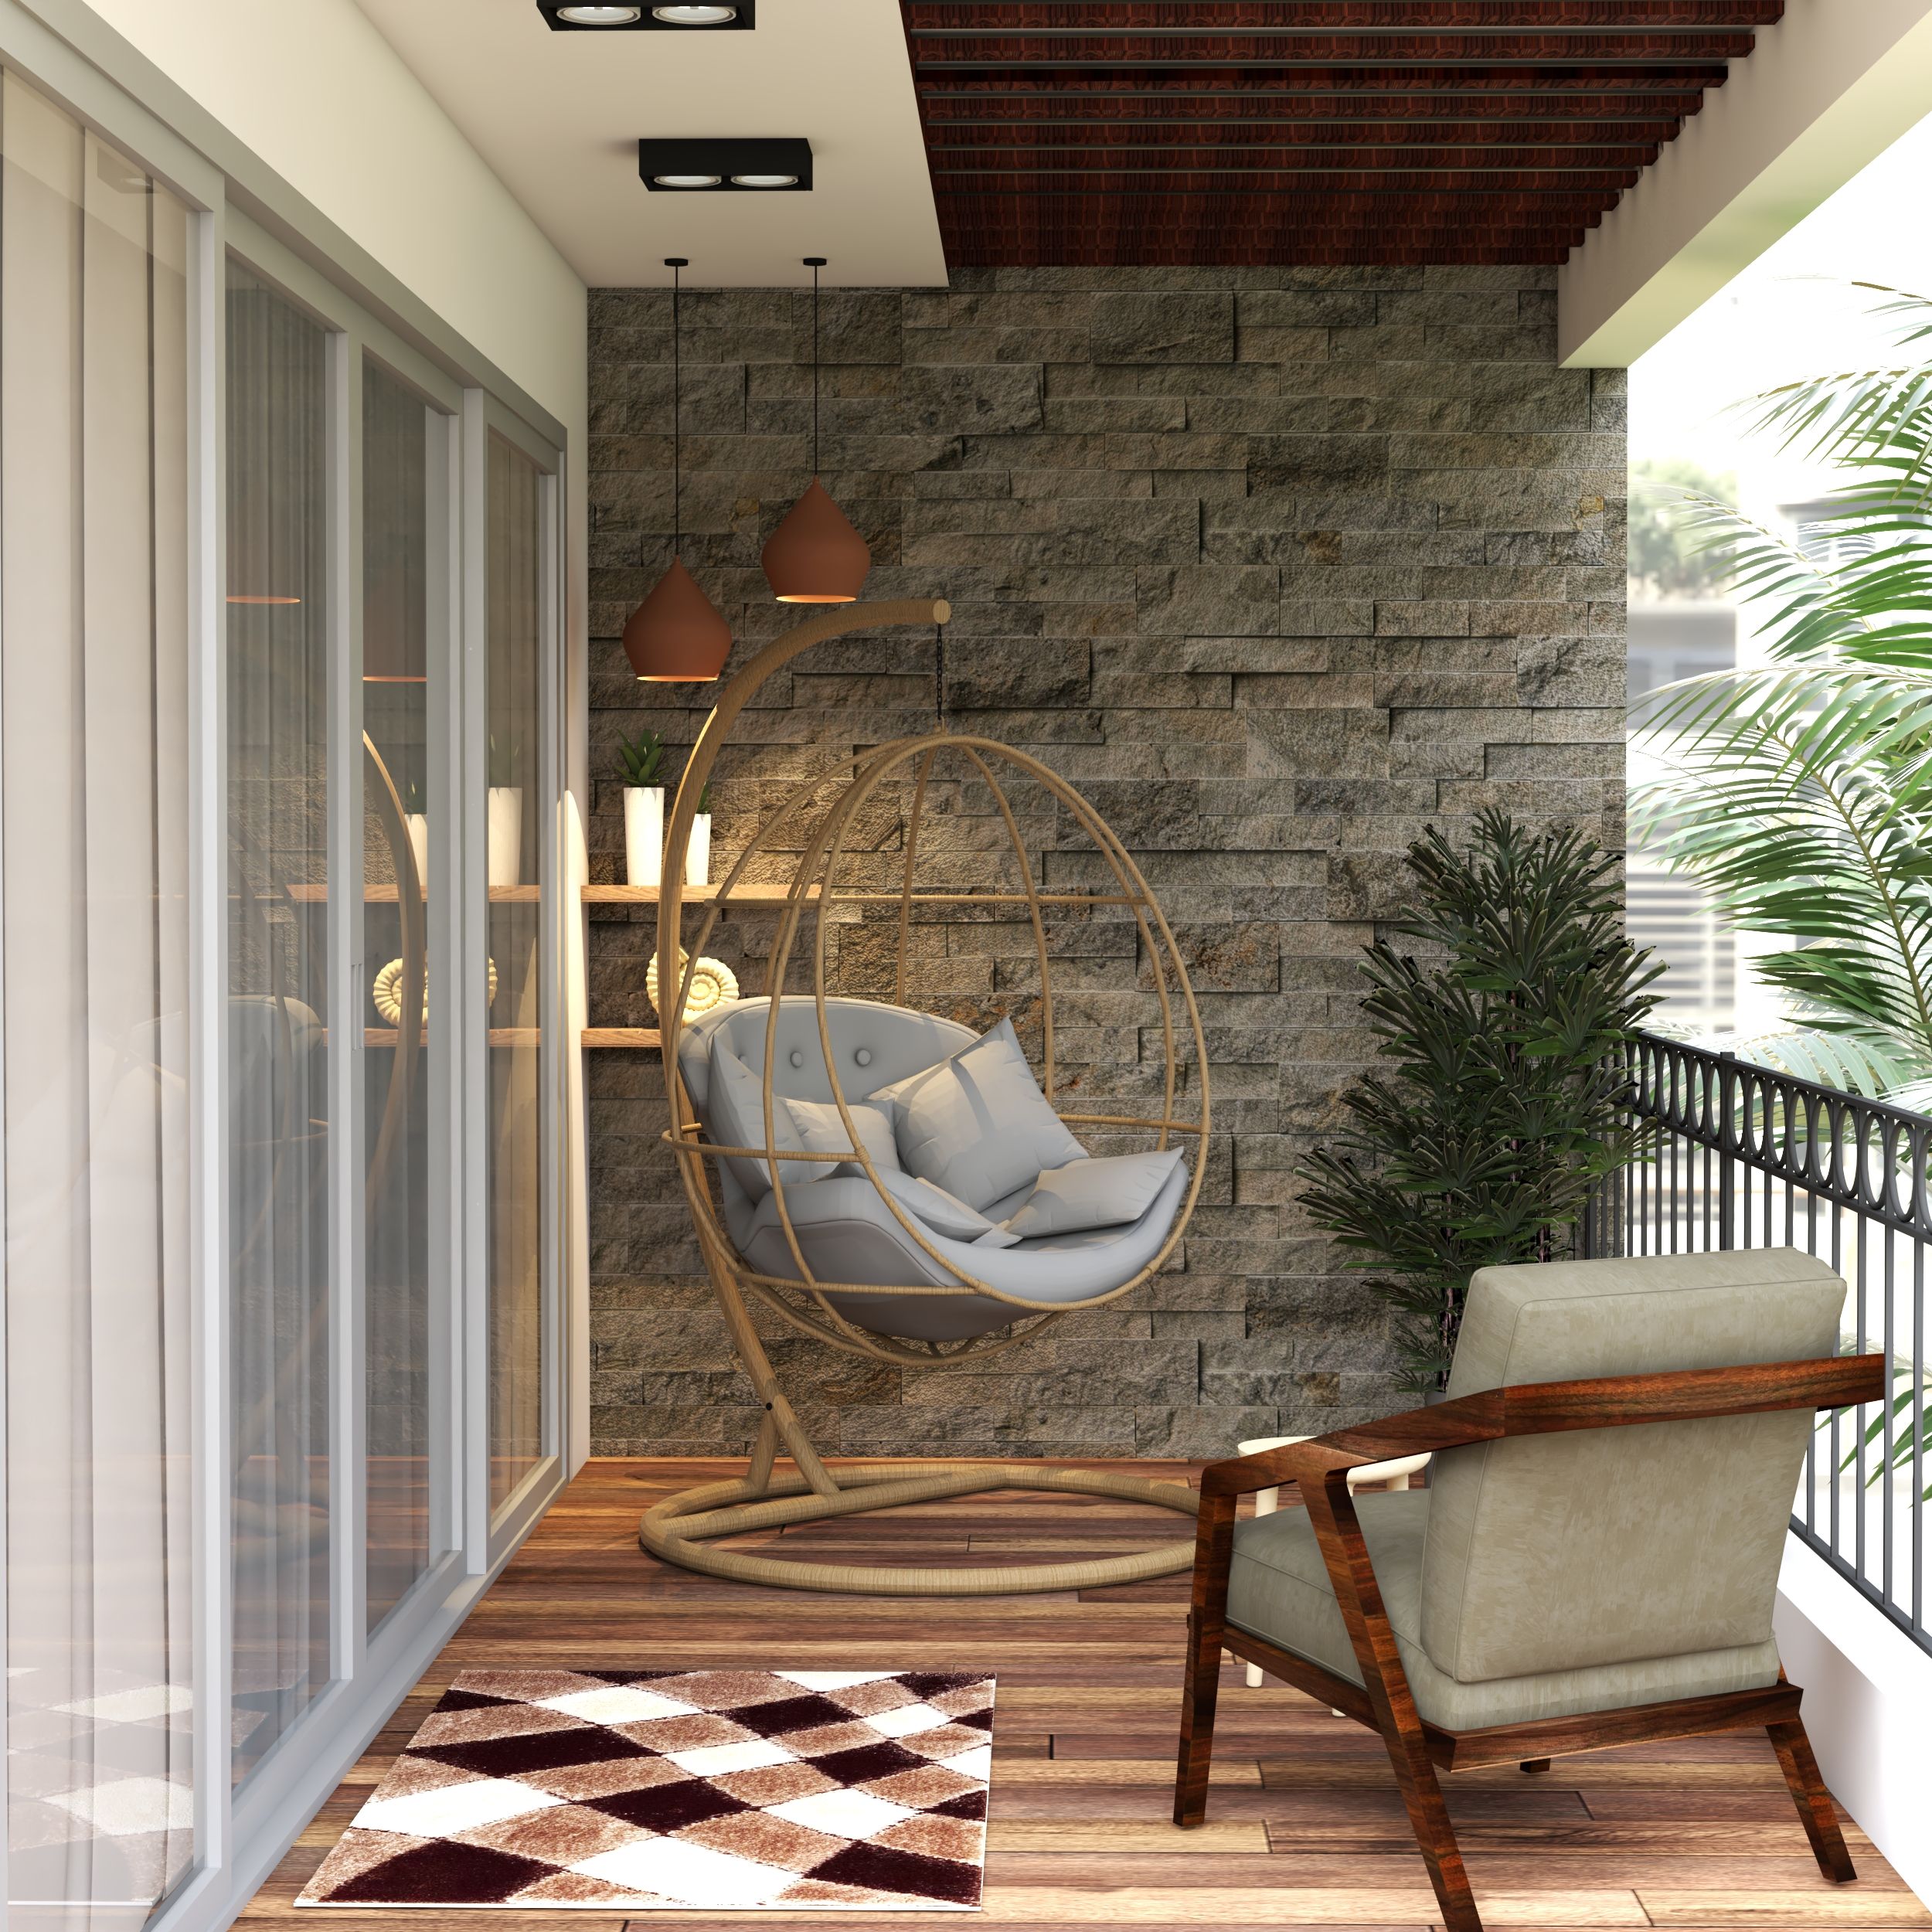 Modern Balcony Design With Stone Cladded Backdrop And Swing